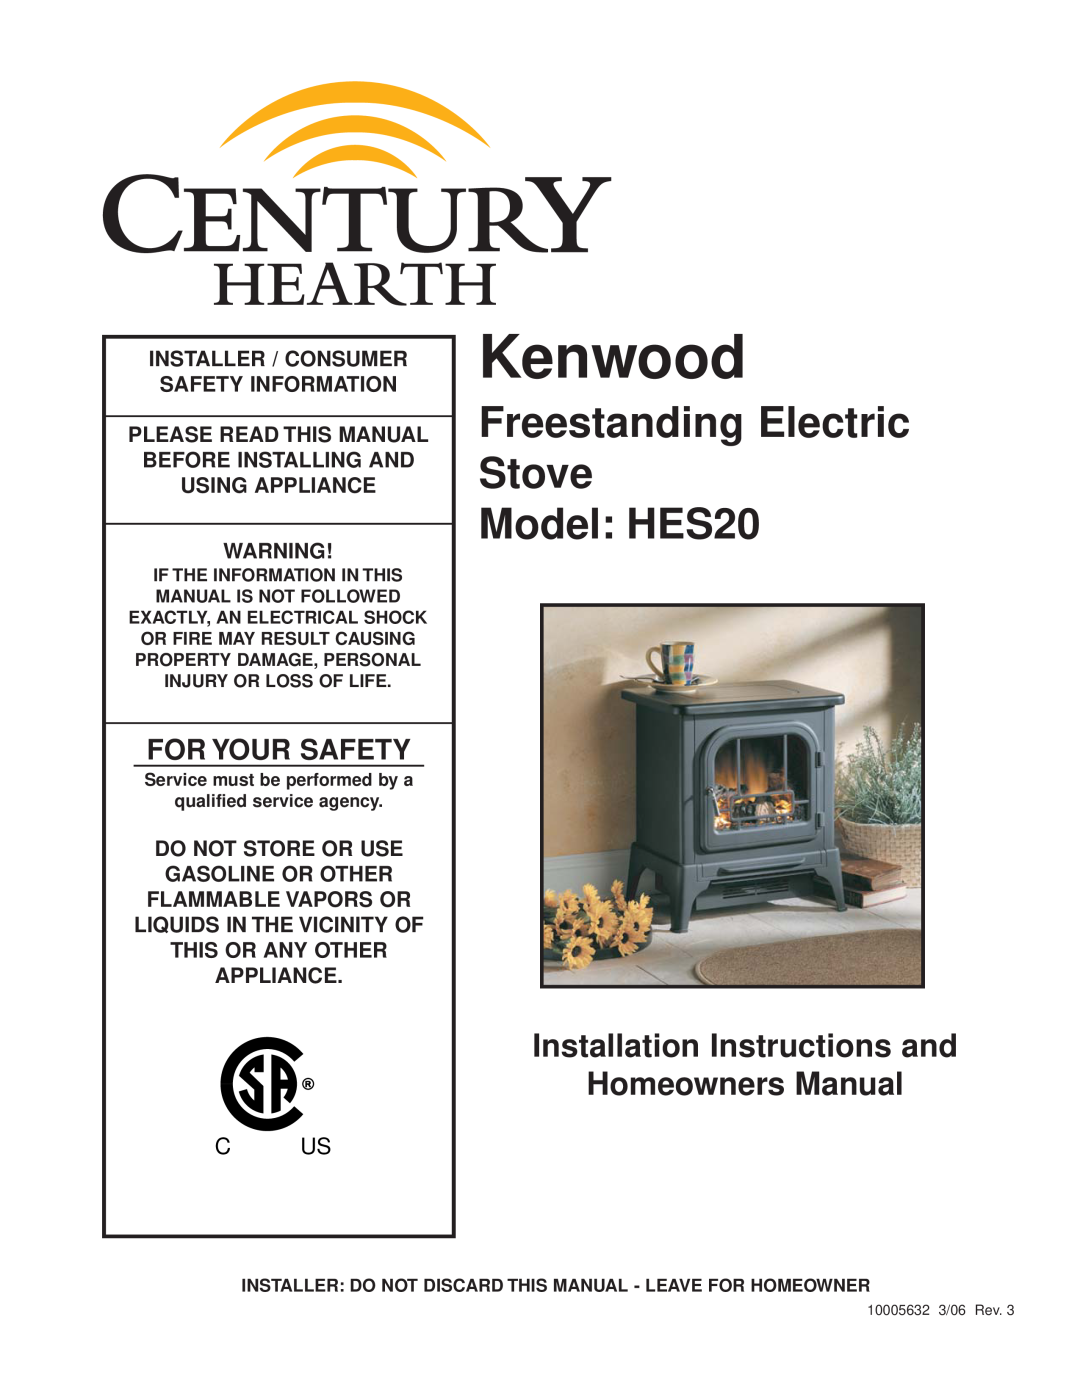 Kenwood HES20 installation instructions Safety Information, Using Appliance, Do Not Store Or Use, Gasoline Or Other 